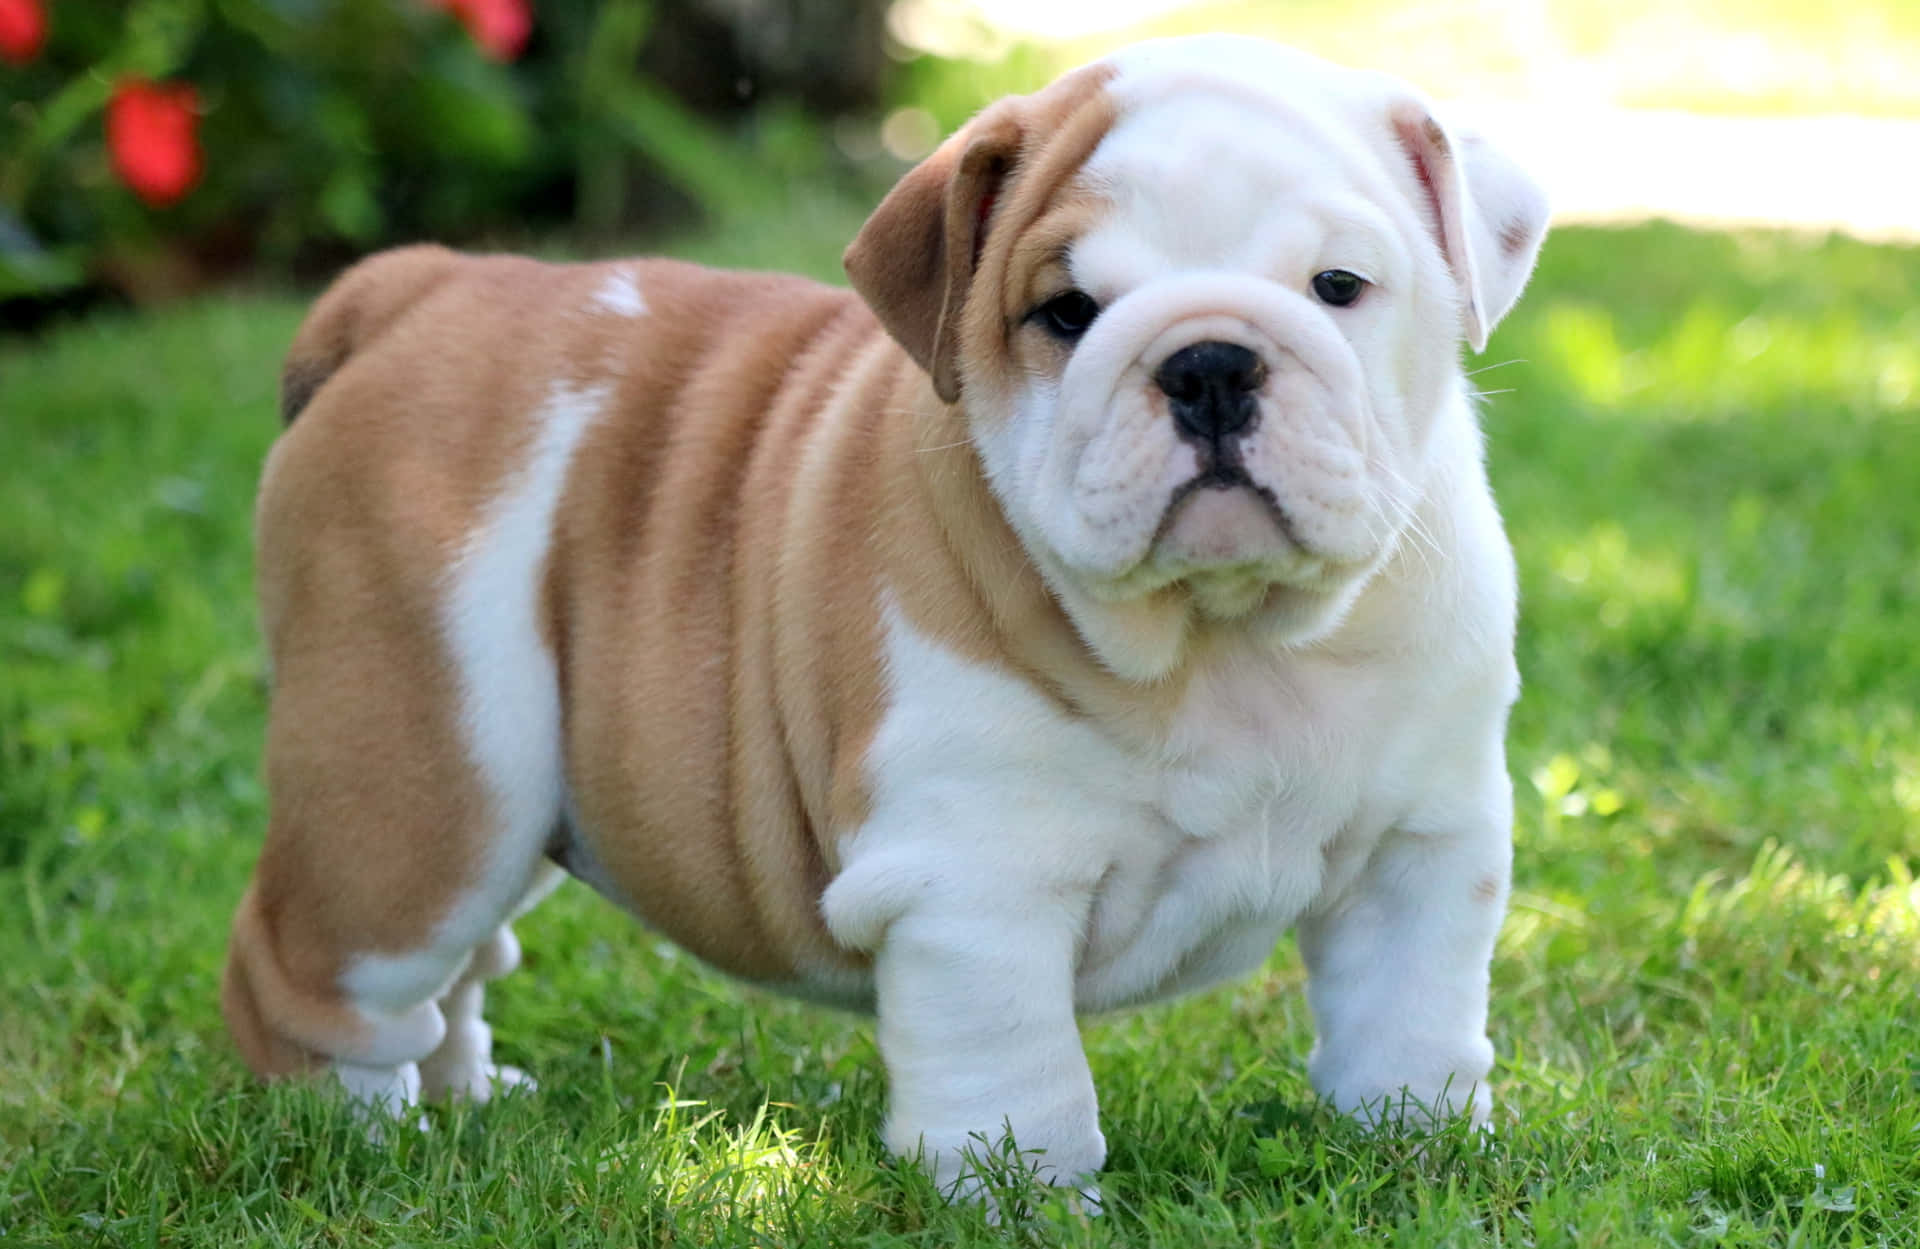 An adorable Bulldog pup looking for a cuddle!